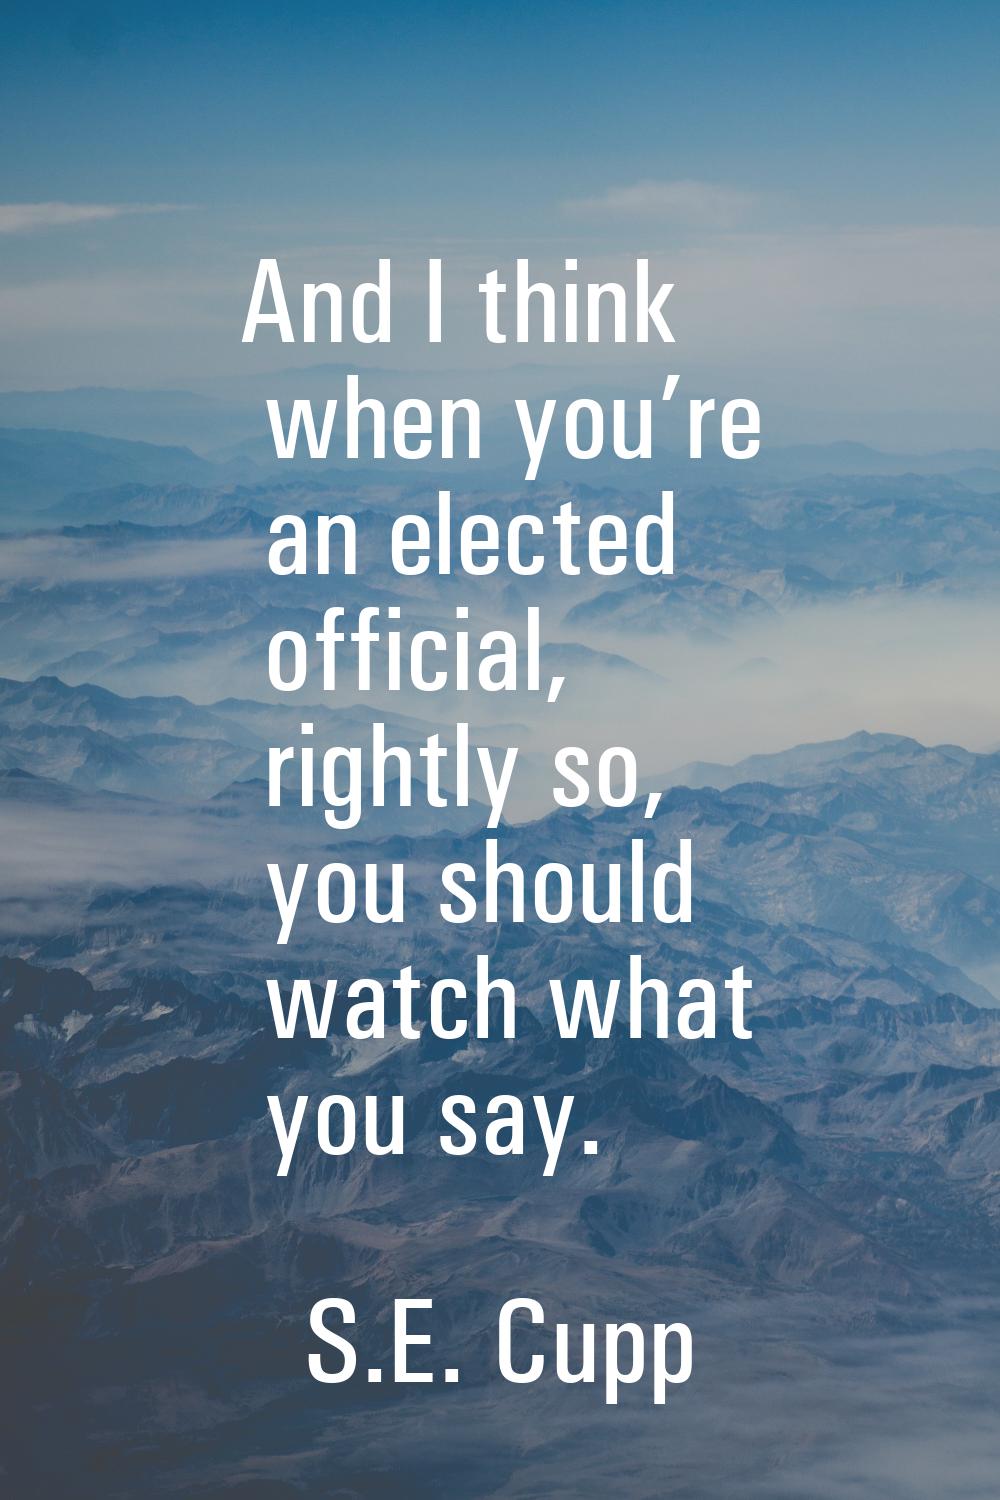 And I think when you’re an elected official, rightly so, you should watch what you say.